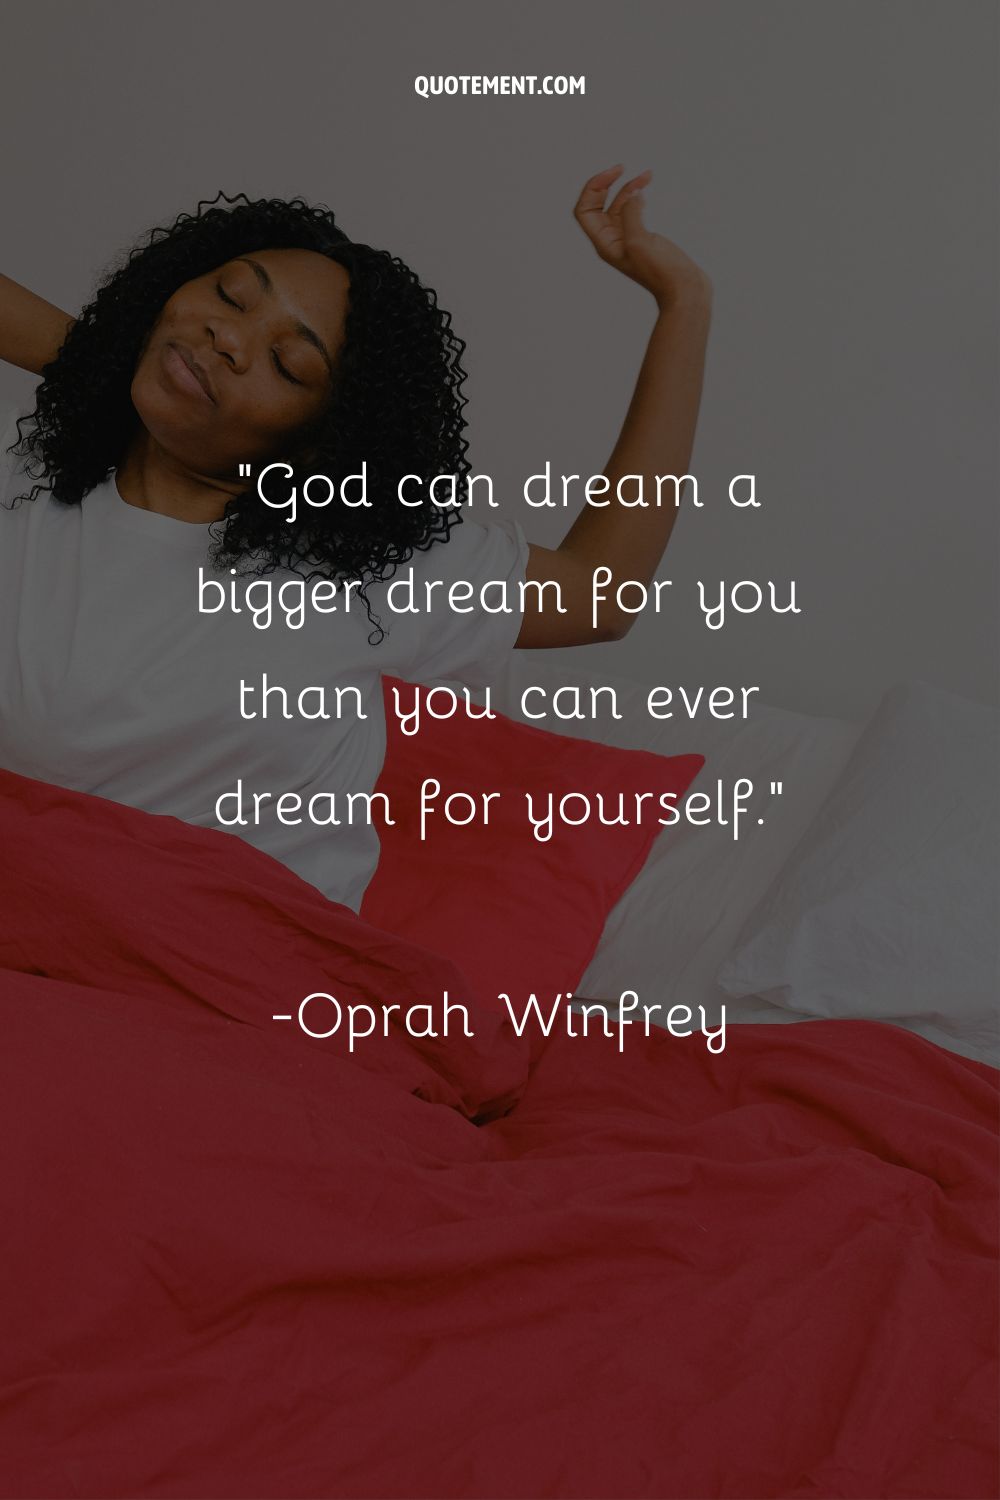 God can dream a bigger dream for you than you can ever dream for yourself